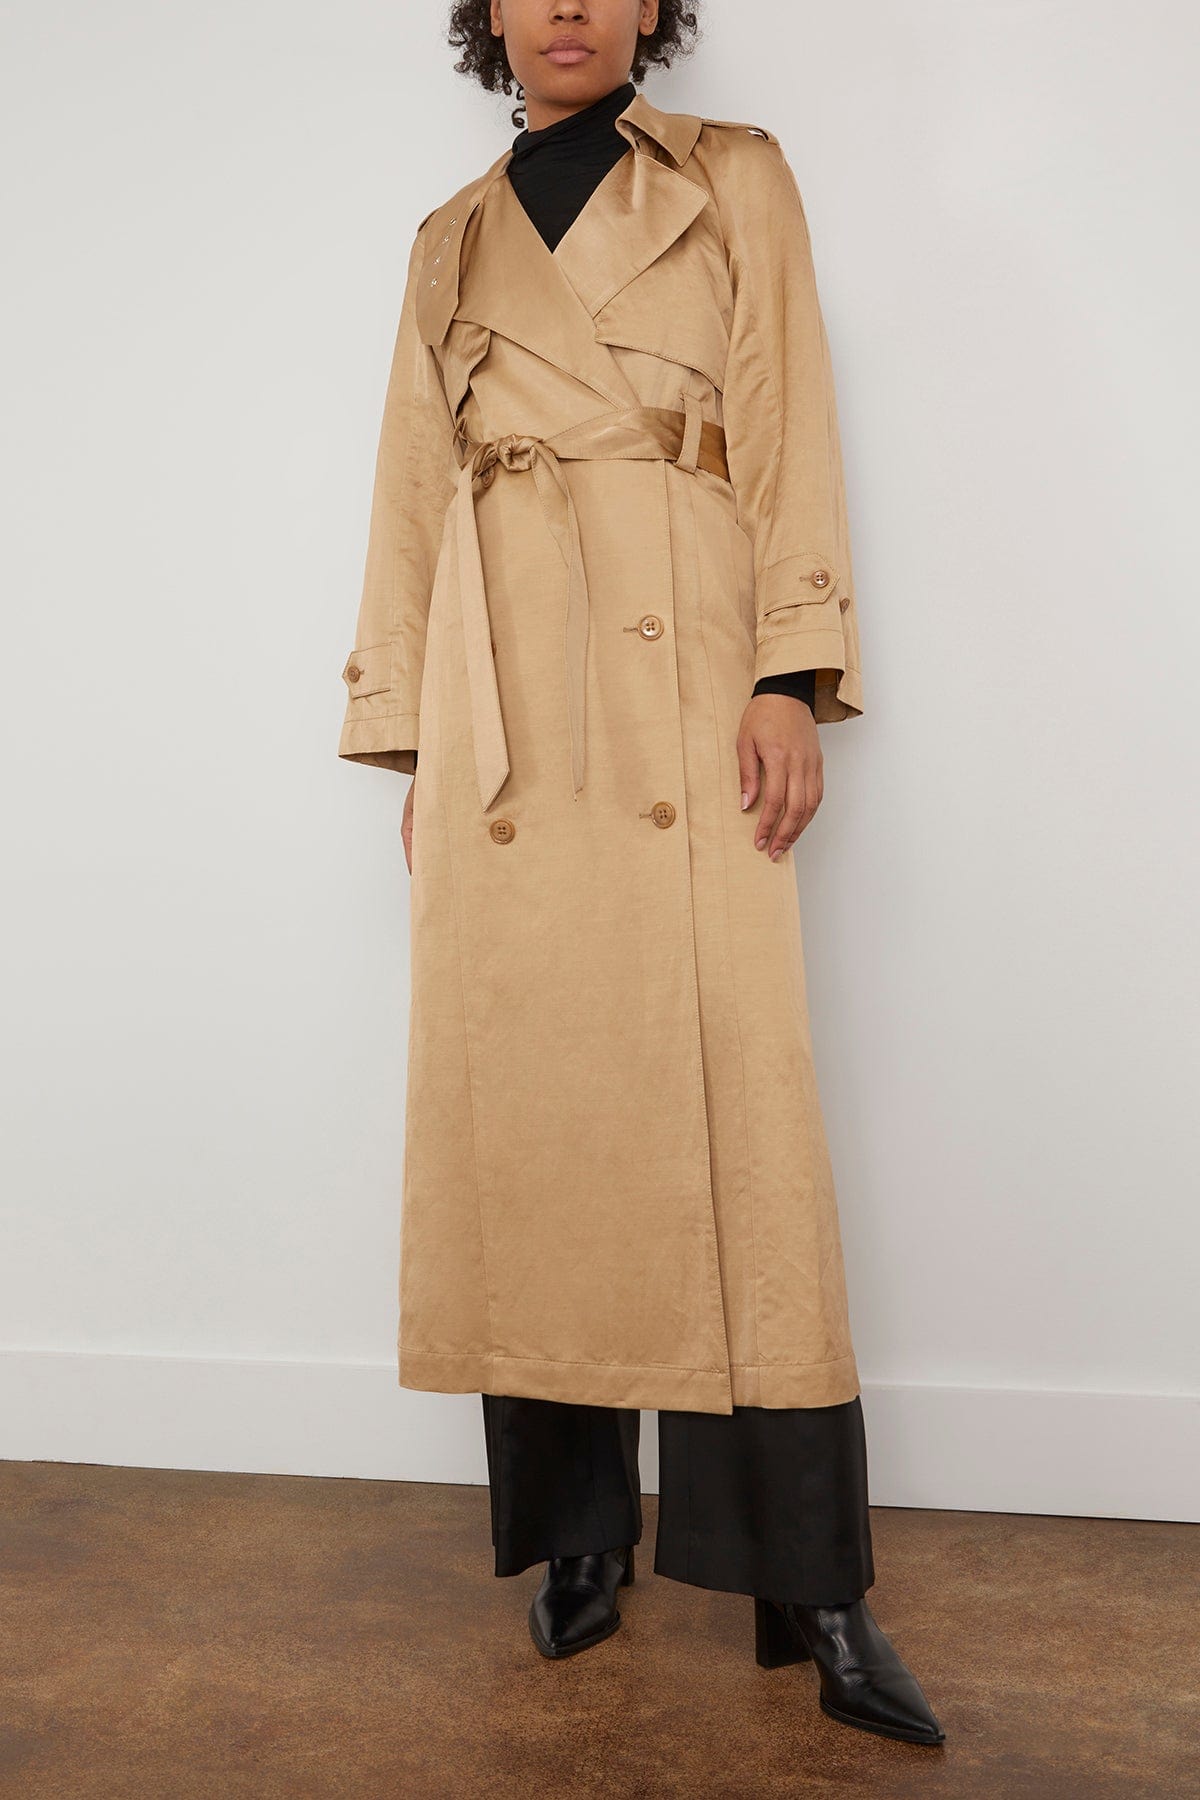 Dorothee Schumacher Coats Slouchy Coolness Trench Coat in Warm Beige Dorothee Schumacher Slouchy Coolness Trench Coat in Warm Beige